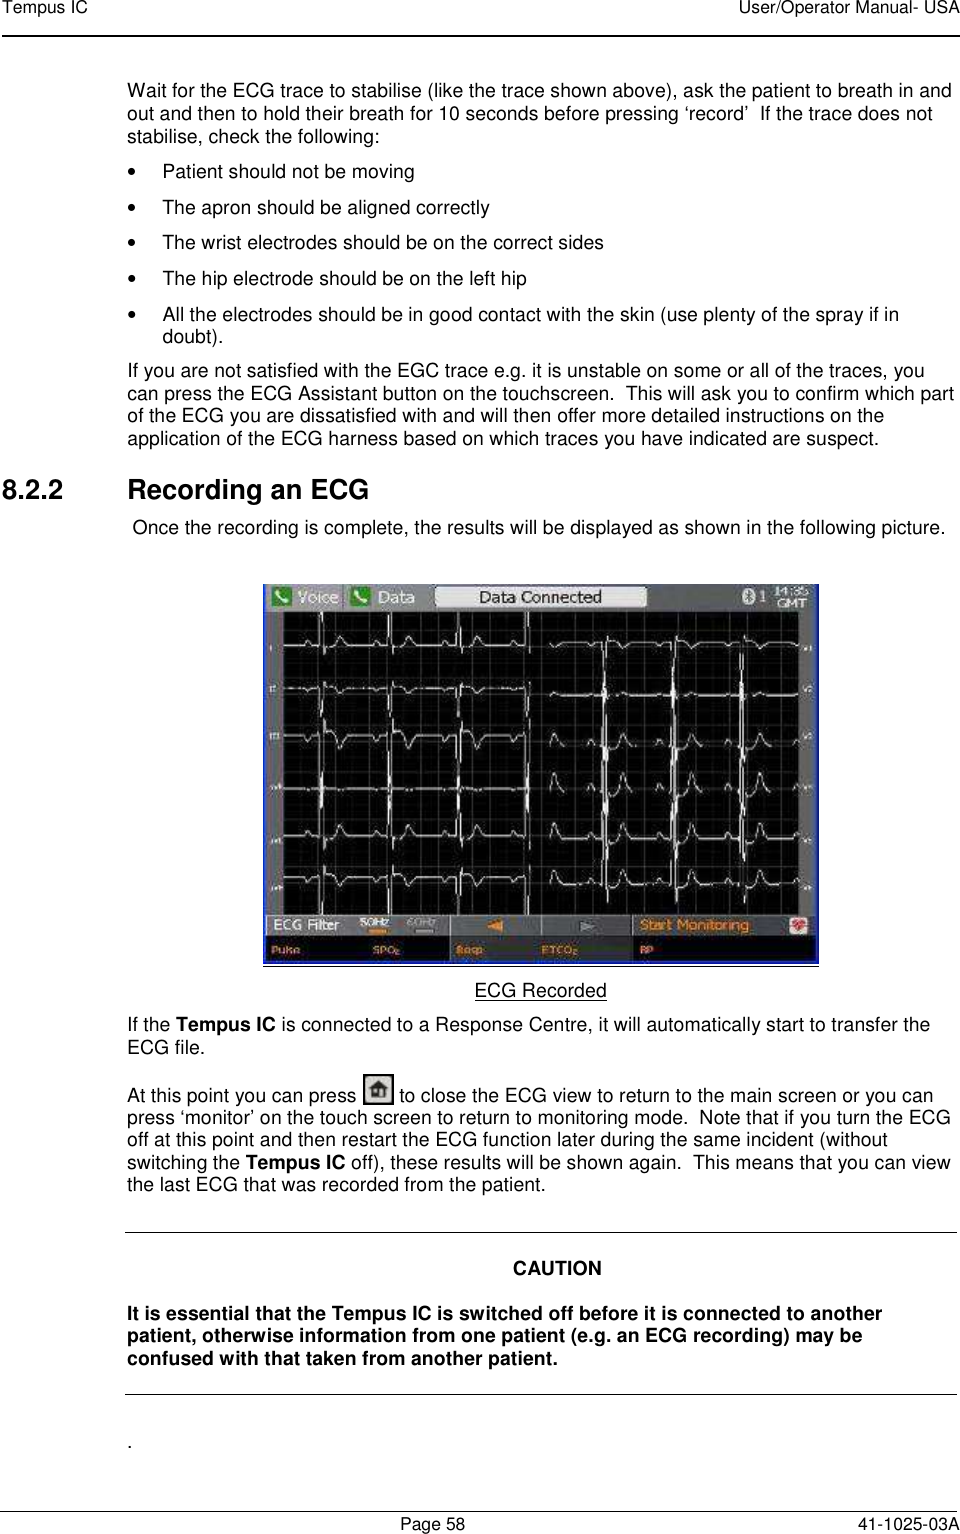 Tempus IC    User/Operator Manual- USA        Page 58  41-1025-03A Wait for the ECG trace to stabilise (like the trace shown above), ask the patient to breath in and out and then to hold their breath for 10 seconds before pressing ‘record’  If the trace does not stabilise, check the following: •  Patient should not be moving •  The apron should be aligned correctly •  The wrist electrodes should be on the correct sides •  The hip electrode should be on the left hip •  All the electrodes should be in good contact with the skin (use plenty of the spray if in doubt). If you are not satisfied with the EGC trace e.g. it is unstable on some or all of the traces, you can press the ECG Assistant button on the touchscreen.  This will ask you to confirm which part of the ECG you are dissatisfied with and will then offer more detailed instructions on the application of the ECG harness based on which traces you have indicated are suspect. 8.2.2  Recording an ECG  Once the recording is complete, the results will be displayed as shown in the following picture.     ECG Recorded If the Tempus IC is connected to a Response Centre, it will automatically start to transfer the ECG file.   At this point you can press   to close the ECG view to return to the main screen or you can press ‘monitor’ on the touch screen to return to monitoring mode.  Note that if you turn the ECG off at this point and then restart the ECG function later during the same incident (without switching the Tempus IC off), these results will be shown again.  This means that you can view the last ECG that was recorded from the patient.      CAUTION  It is essential that the Tempus IC is switched off before it is connected to another patient, otherwise information from one patient (e.g. an ECG recording) may be confused with that taken from another patient.    .  